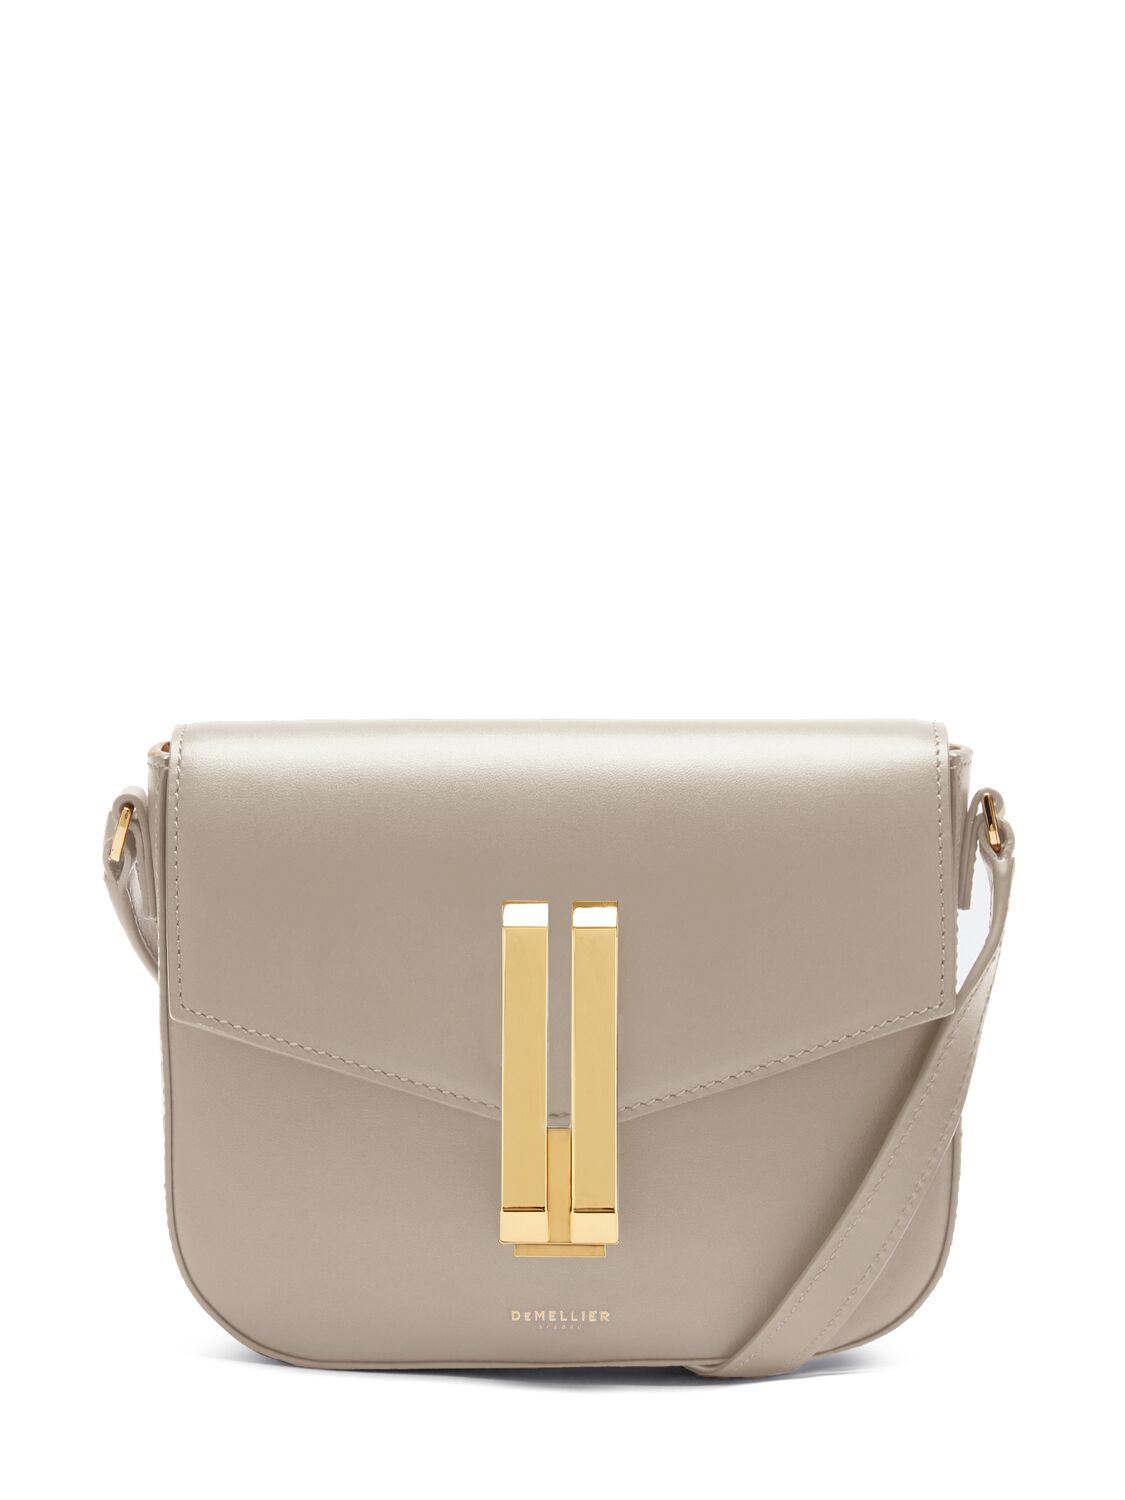 Demellier Small Vancouver Smooth Leather Bag In Taupe